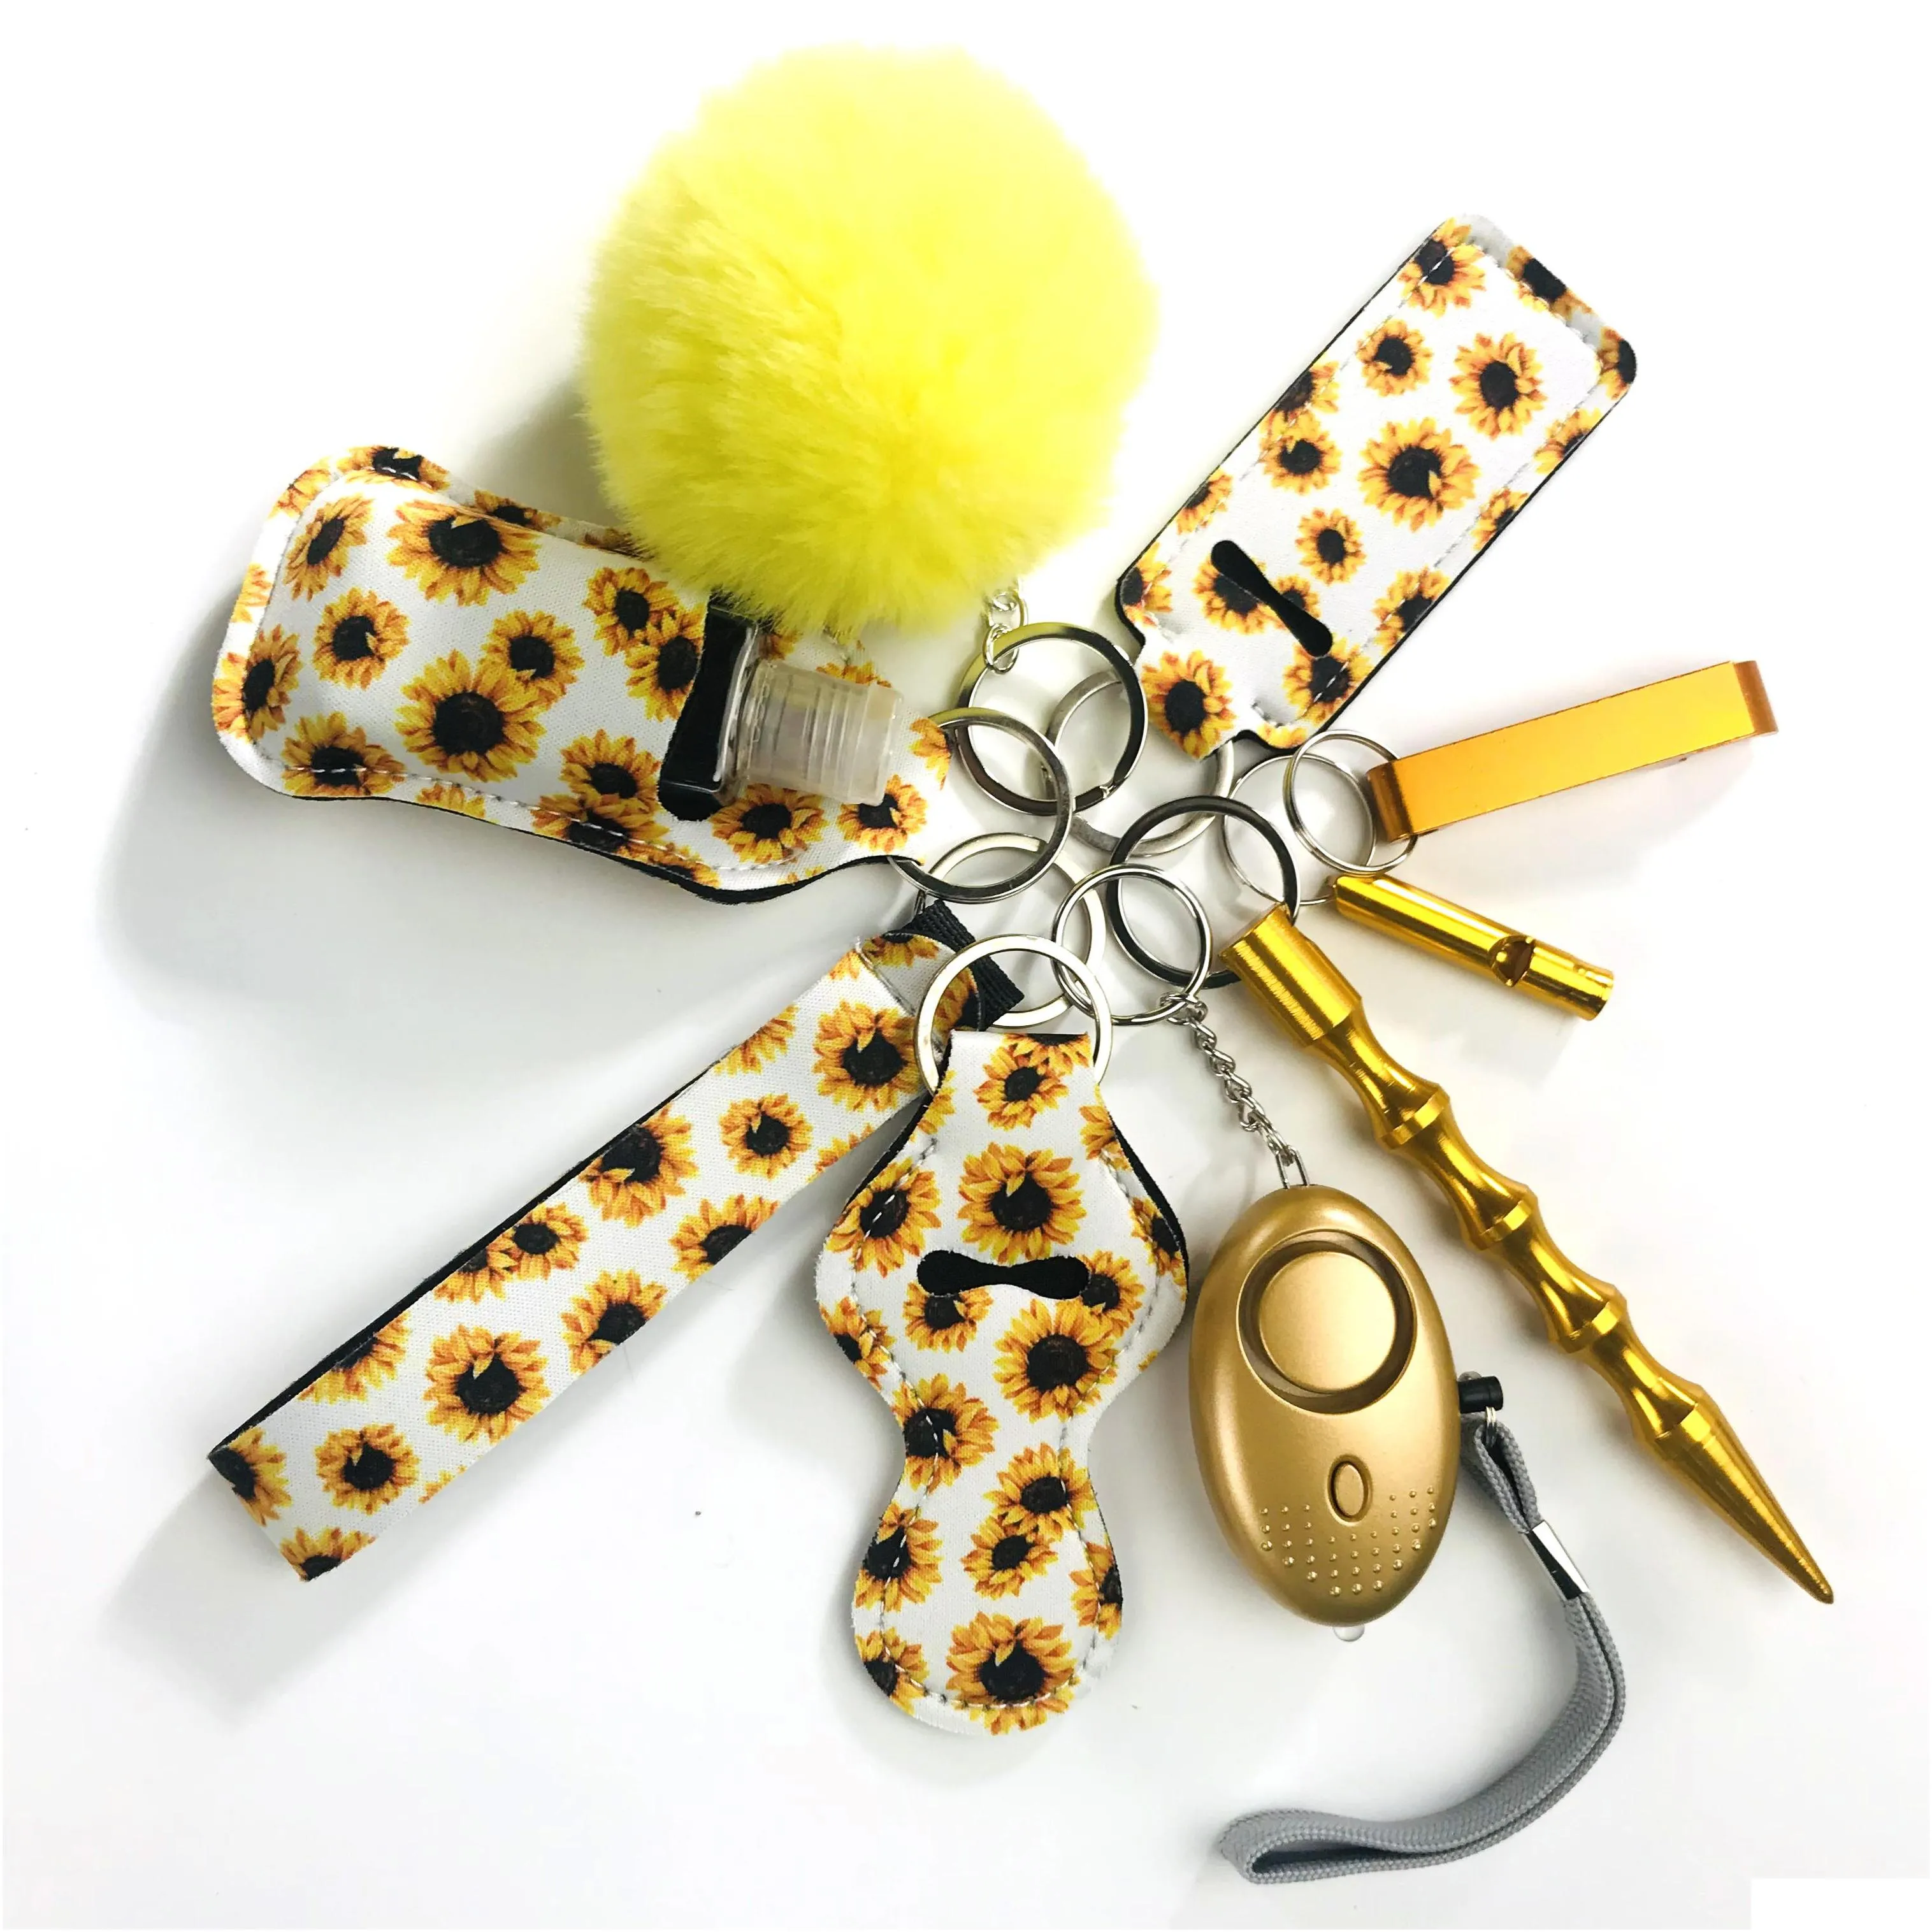 9.8 per set moq 20 sets fashion engrave keychains drive safe keychain couple colorful style love keychains